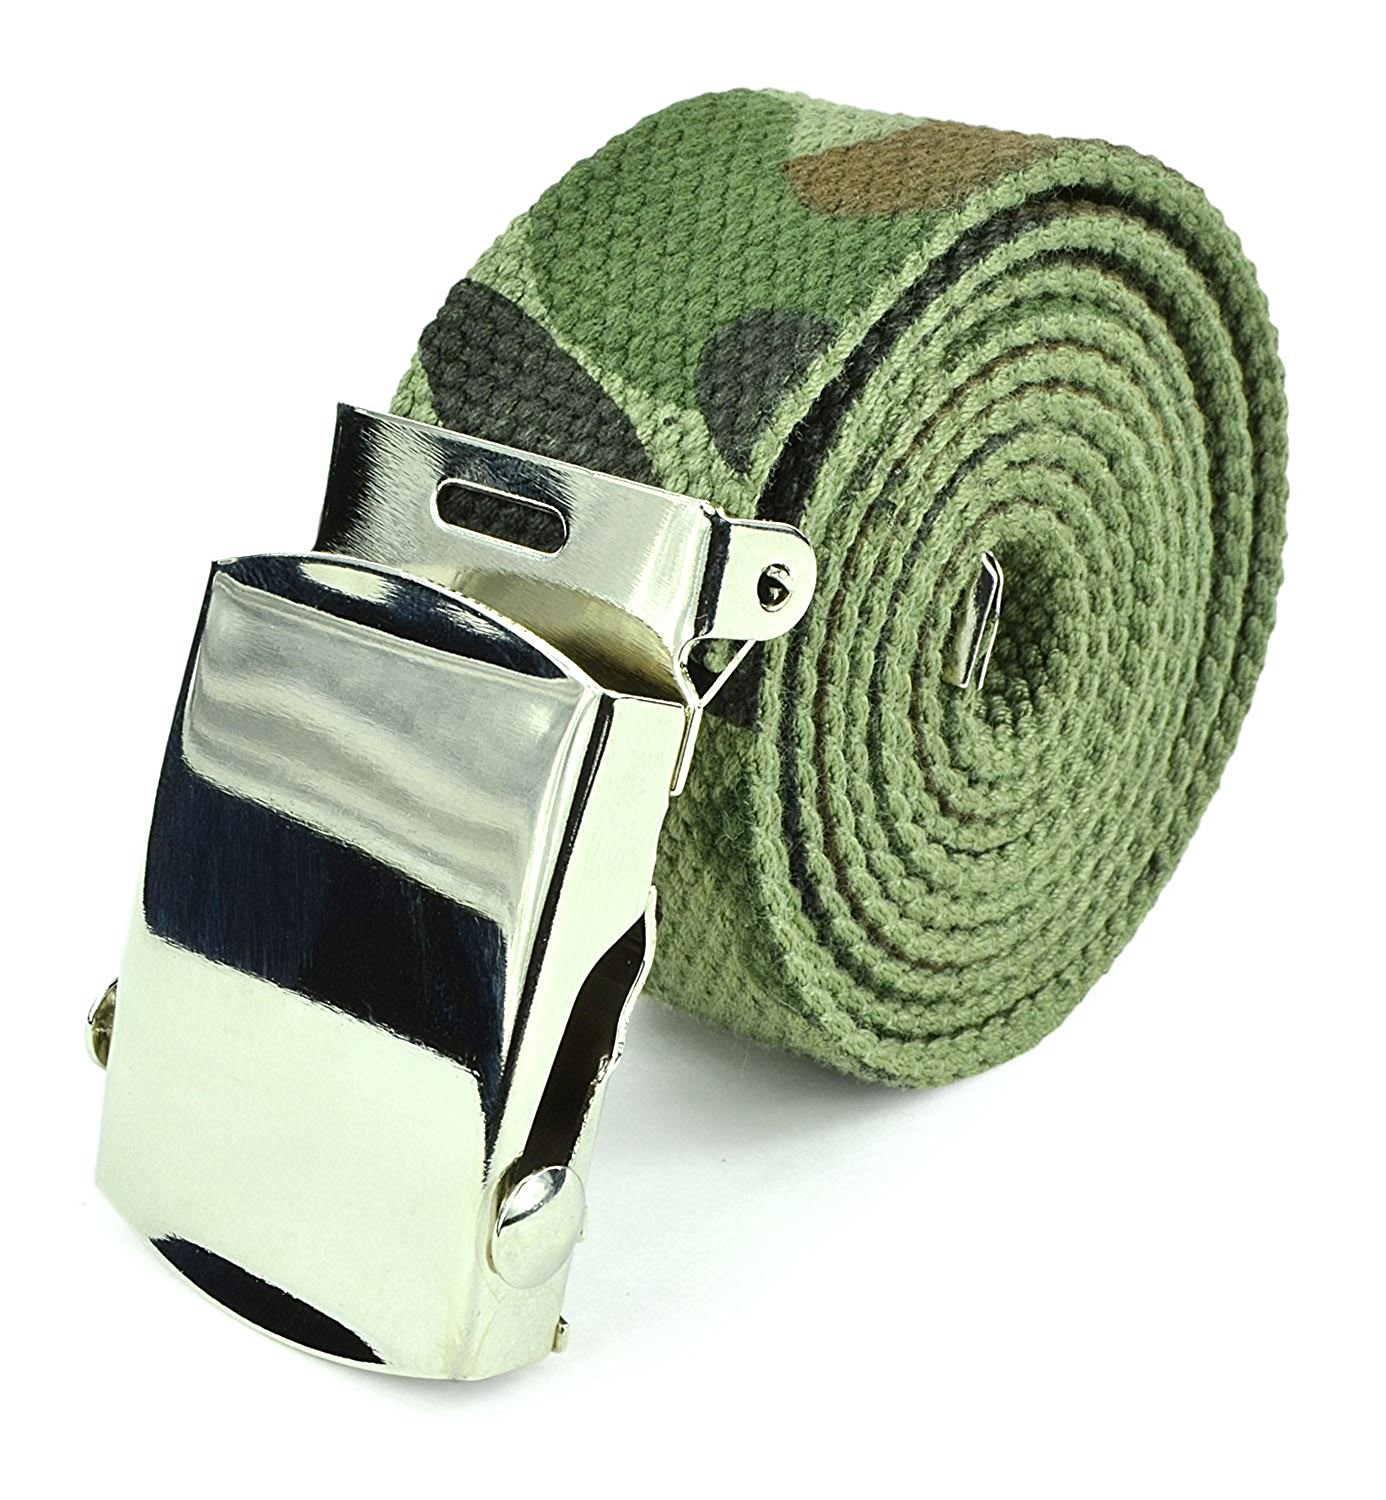 Canvas Web Belt Military Tactical Style Slide Buckle 44" / 46" Long - Army Green